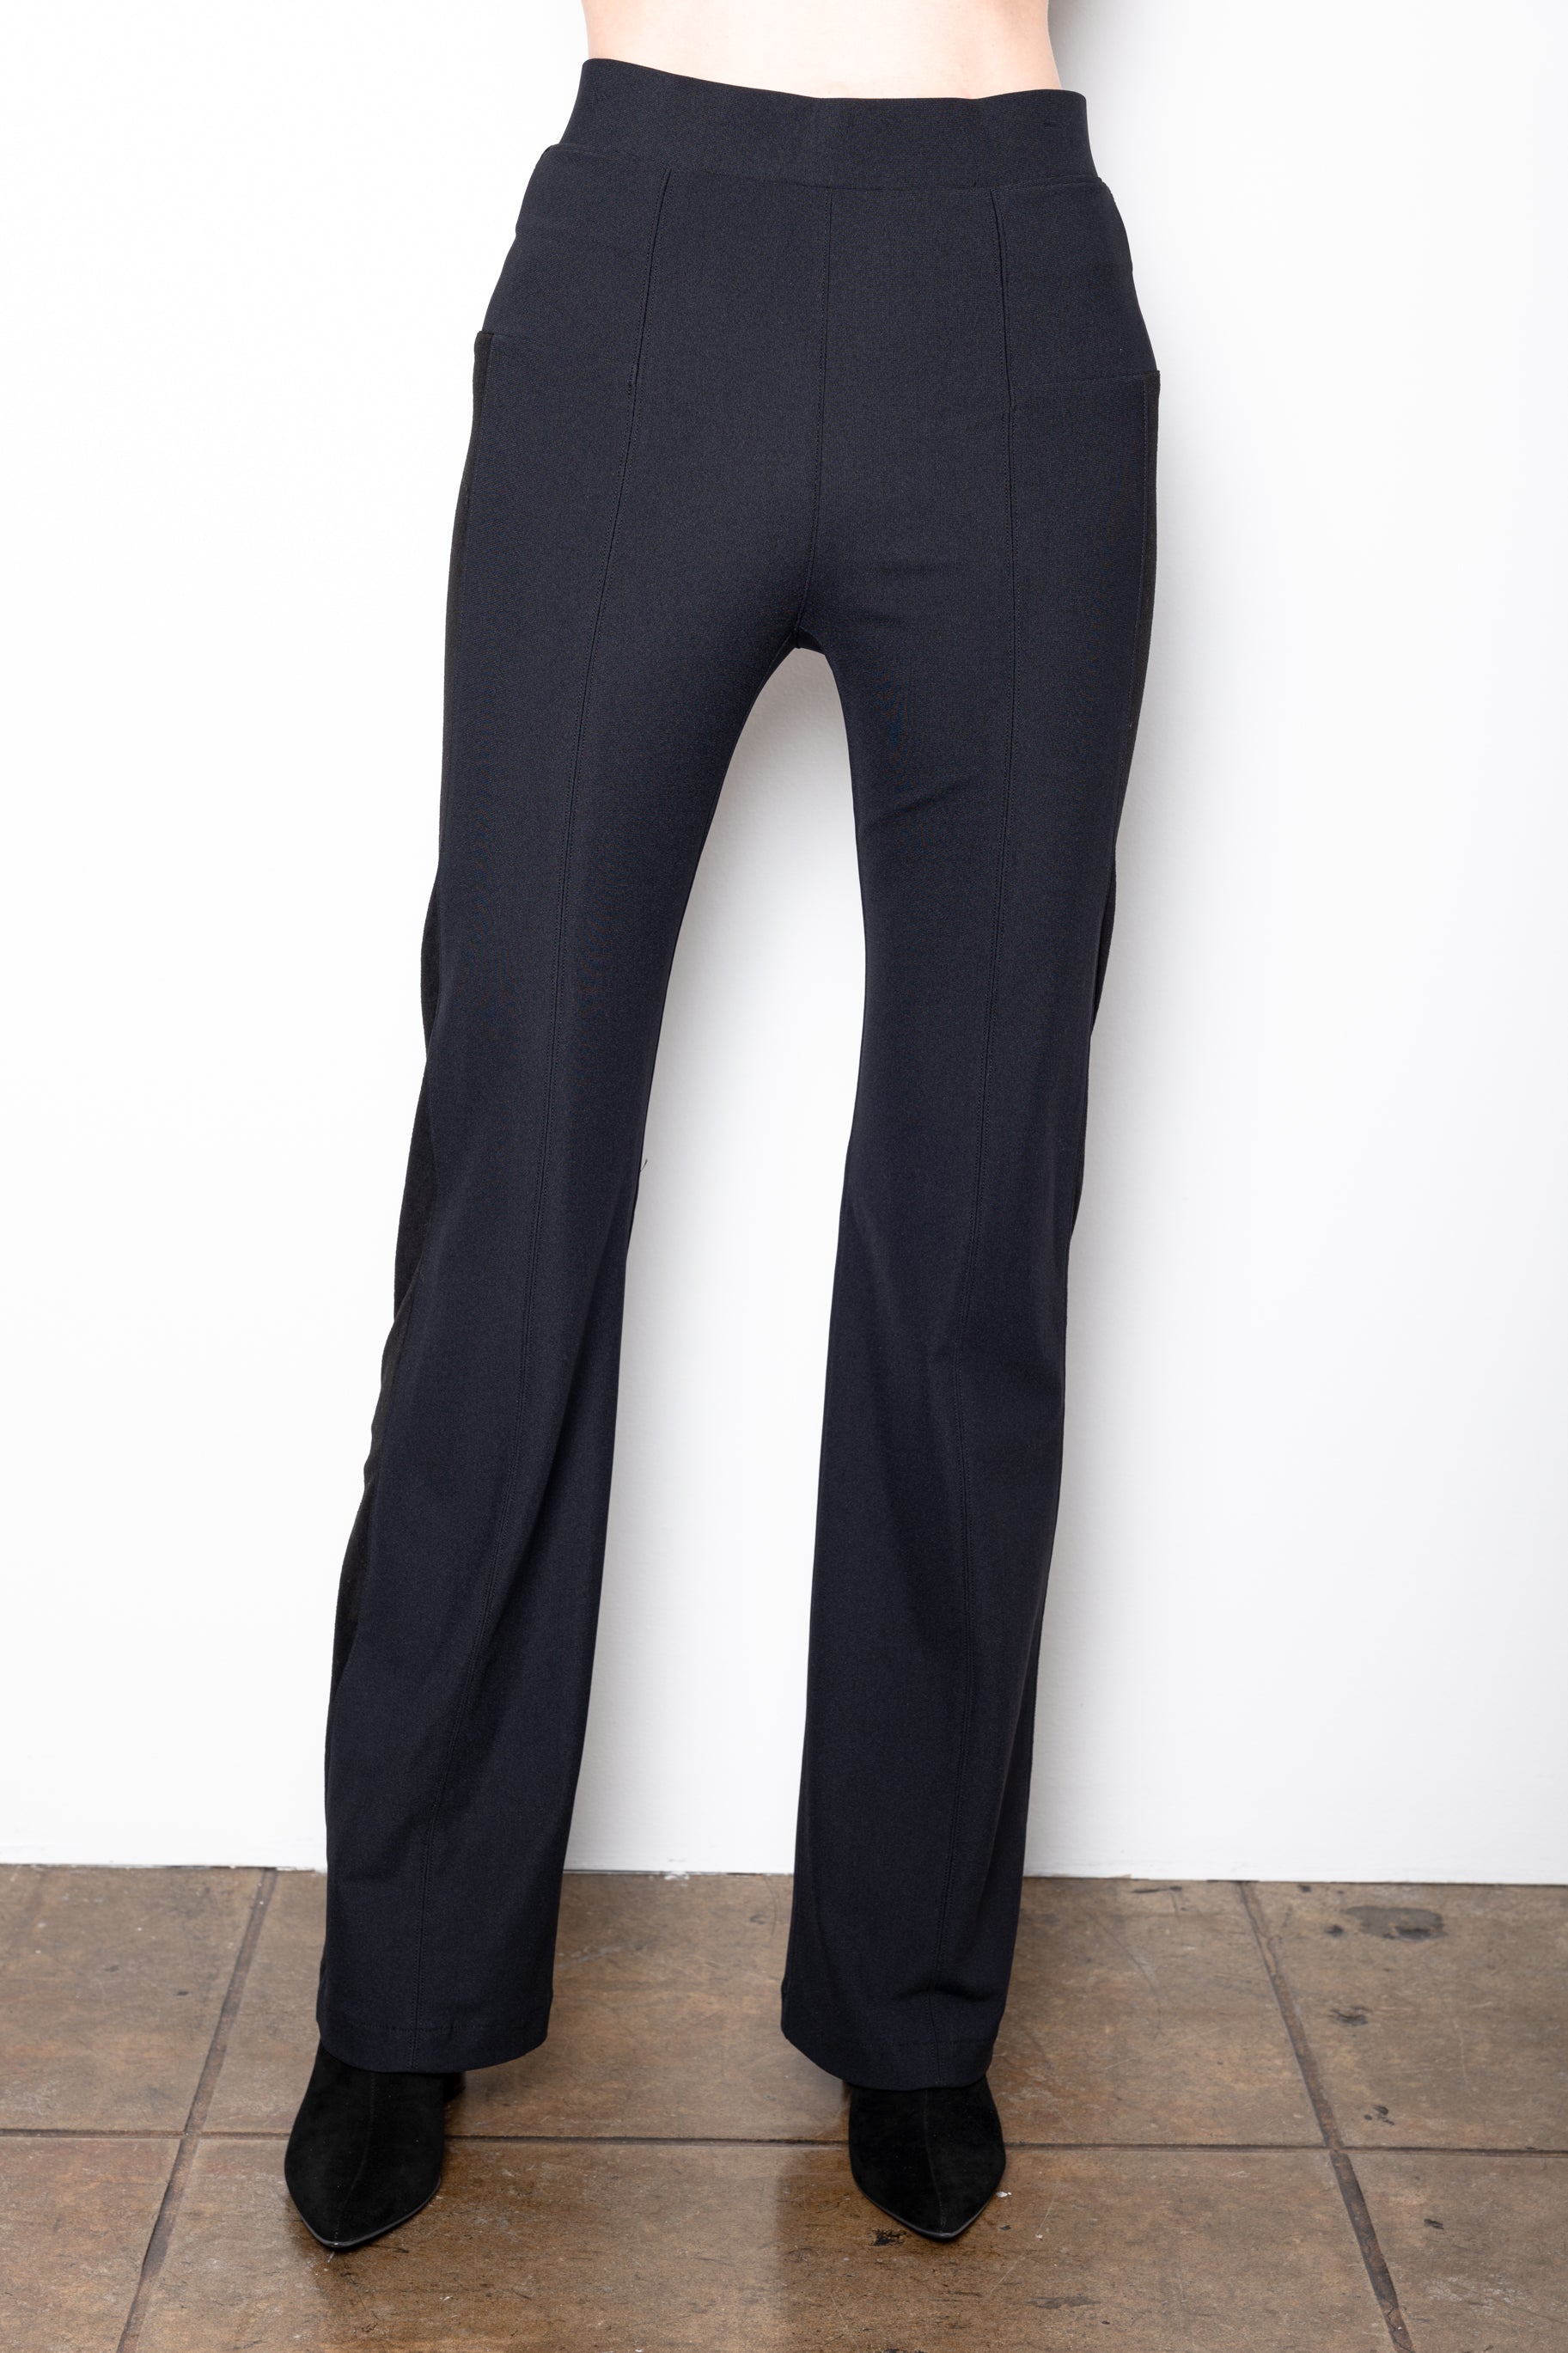 Masikini  Denim & Co. Active Tall Duo Stretch Pant with Side Pocket,Black,  Tall Large